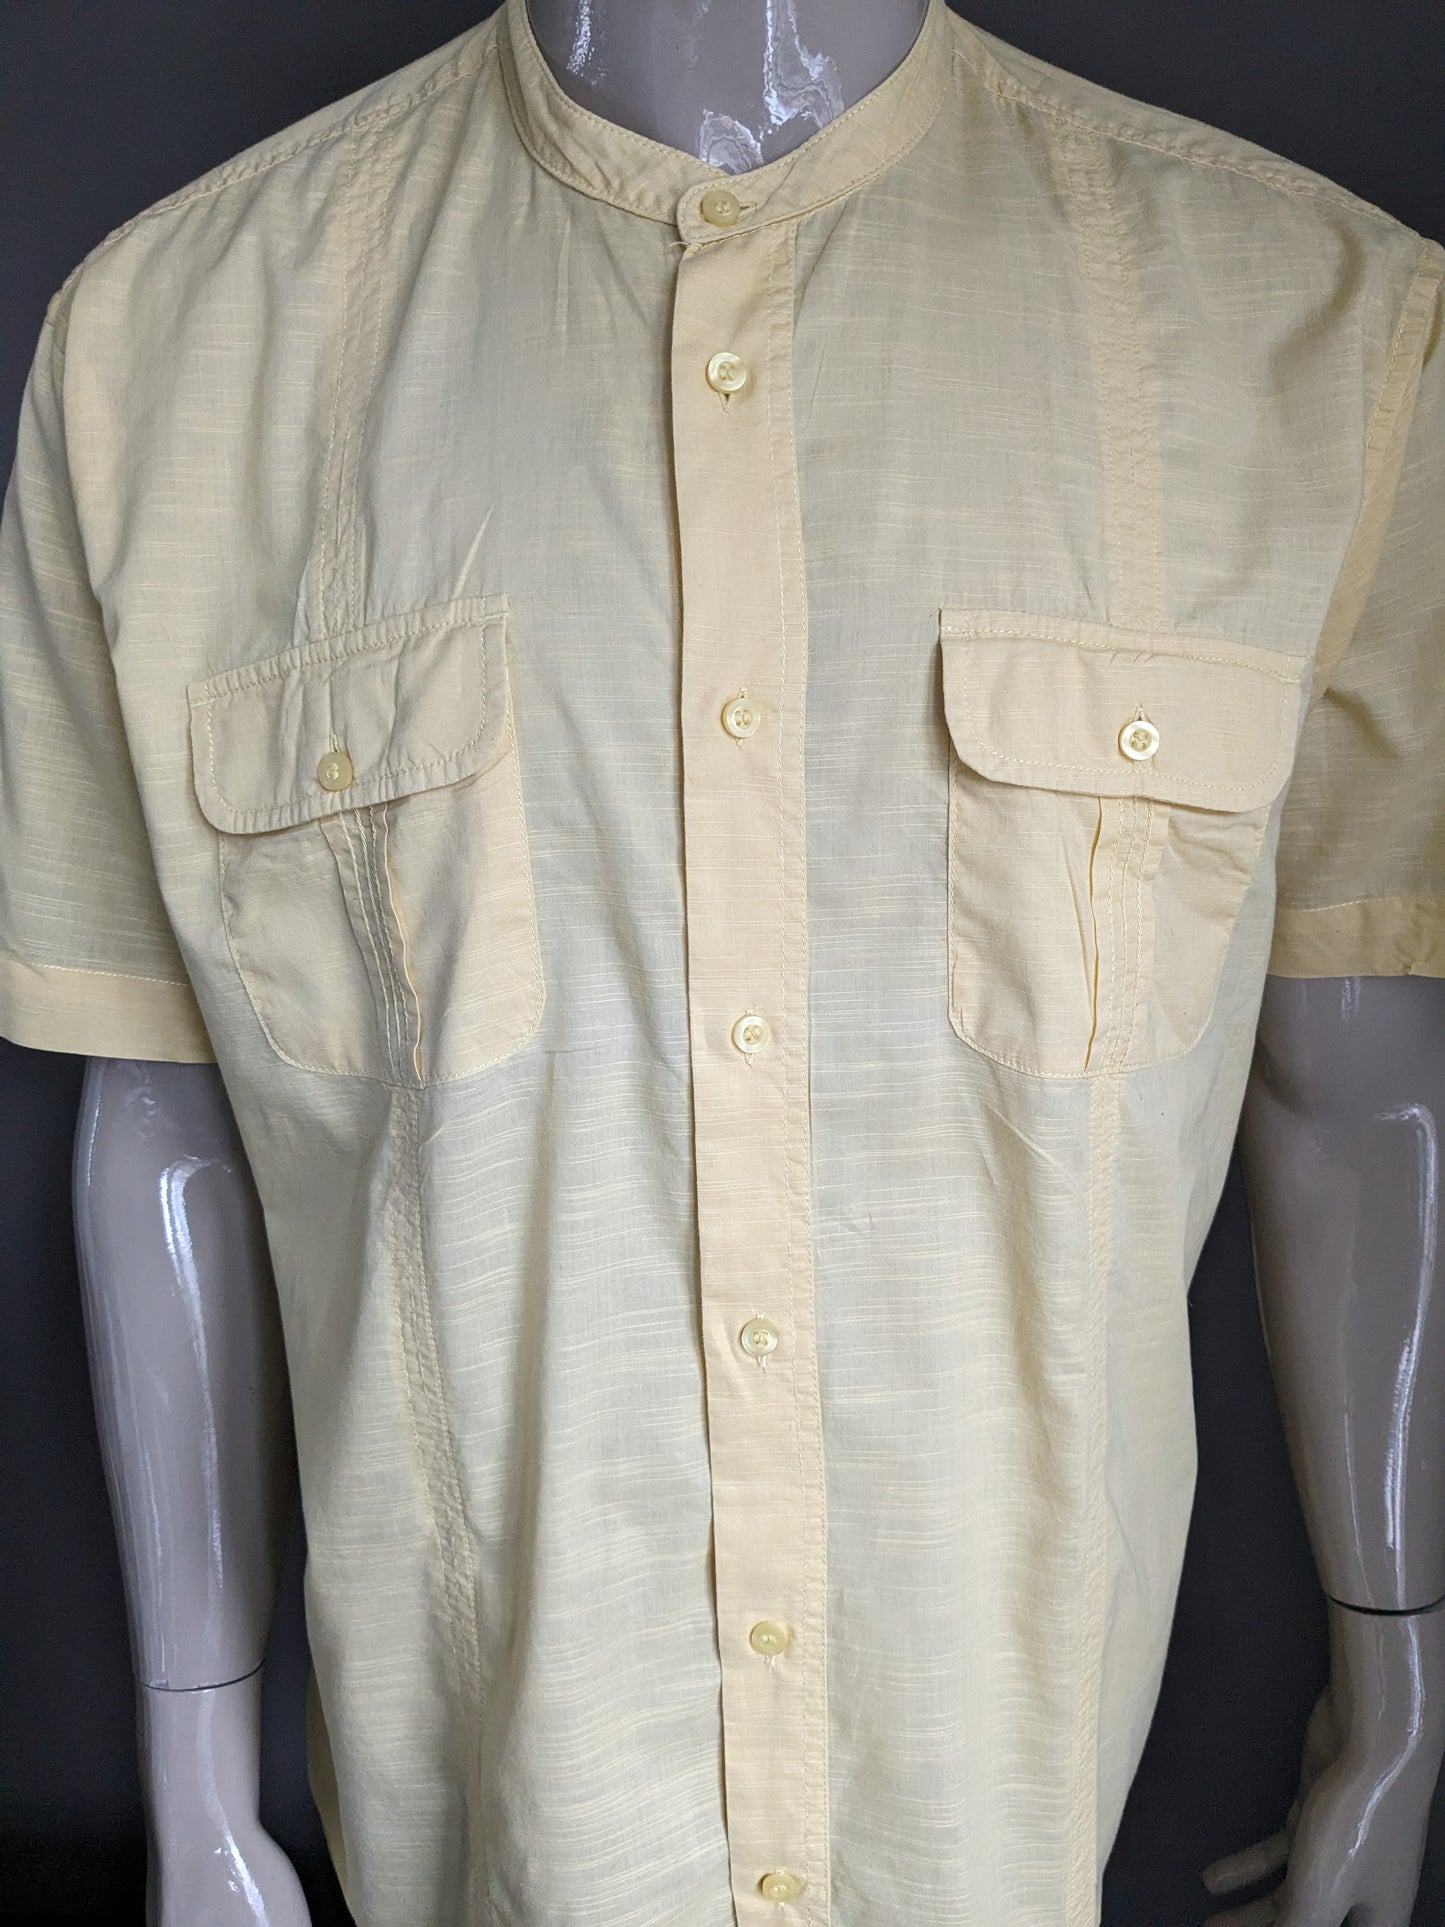 Vintage Angelo Litrico Shirt Short Sleeve with Mao / Standing Collar. Yellow motif. Size XL.